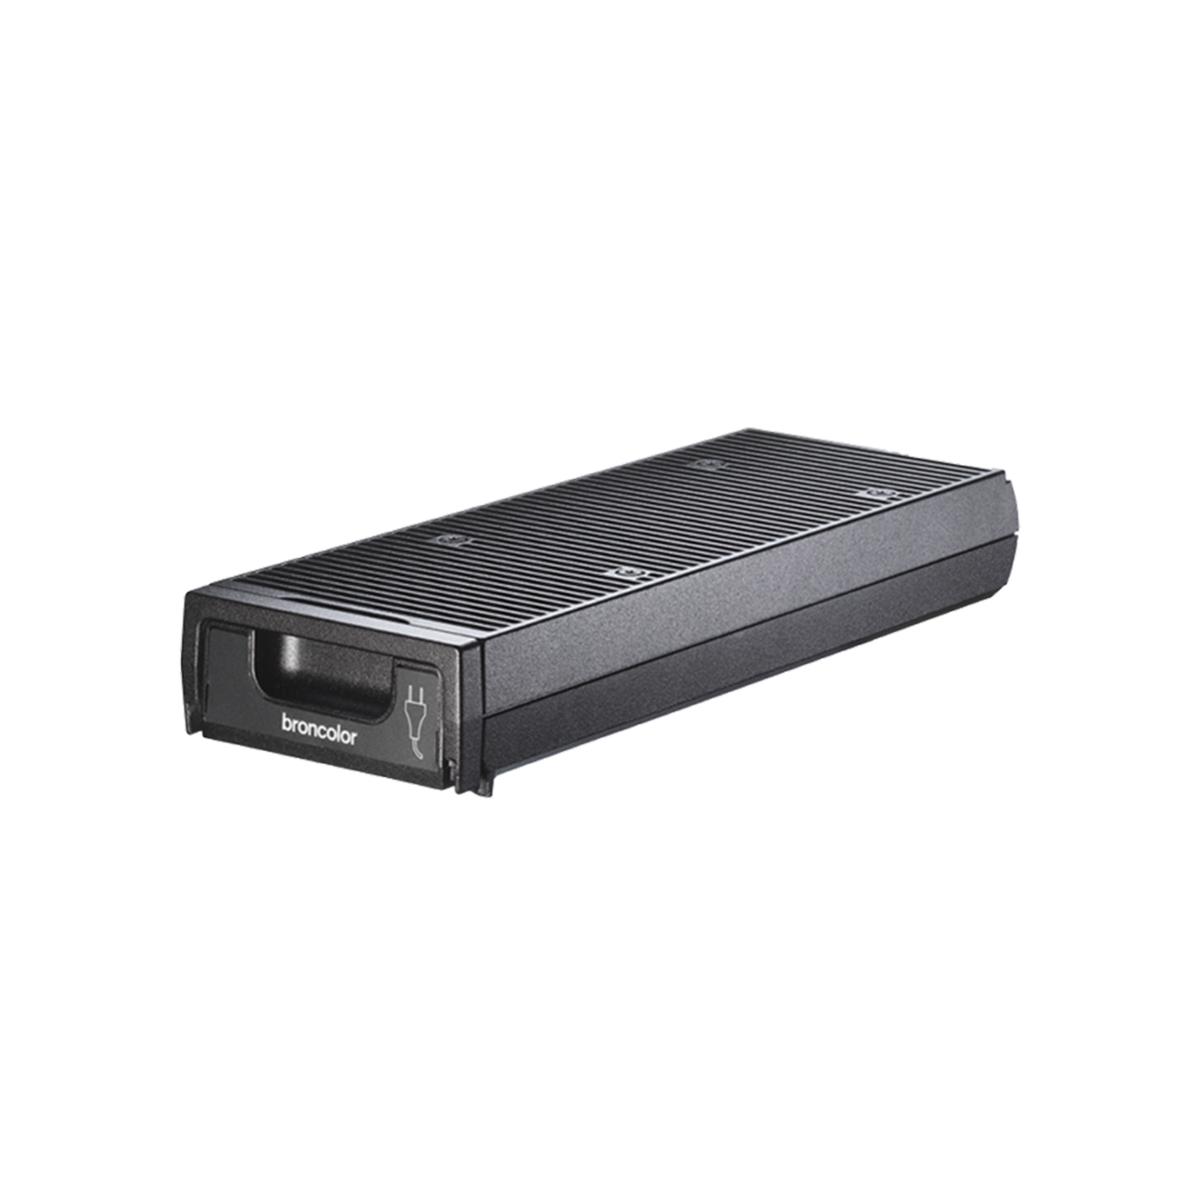 Image of Broncolor 48V 400W Slide-In AC Power Supply for Satos Power Packs